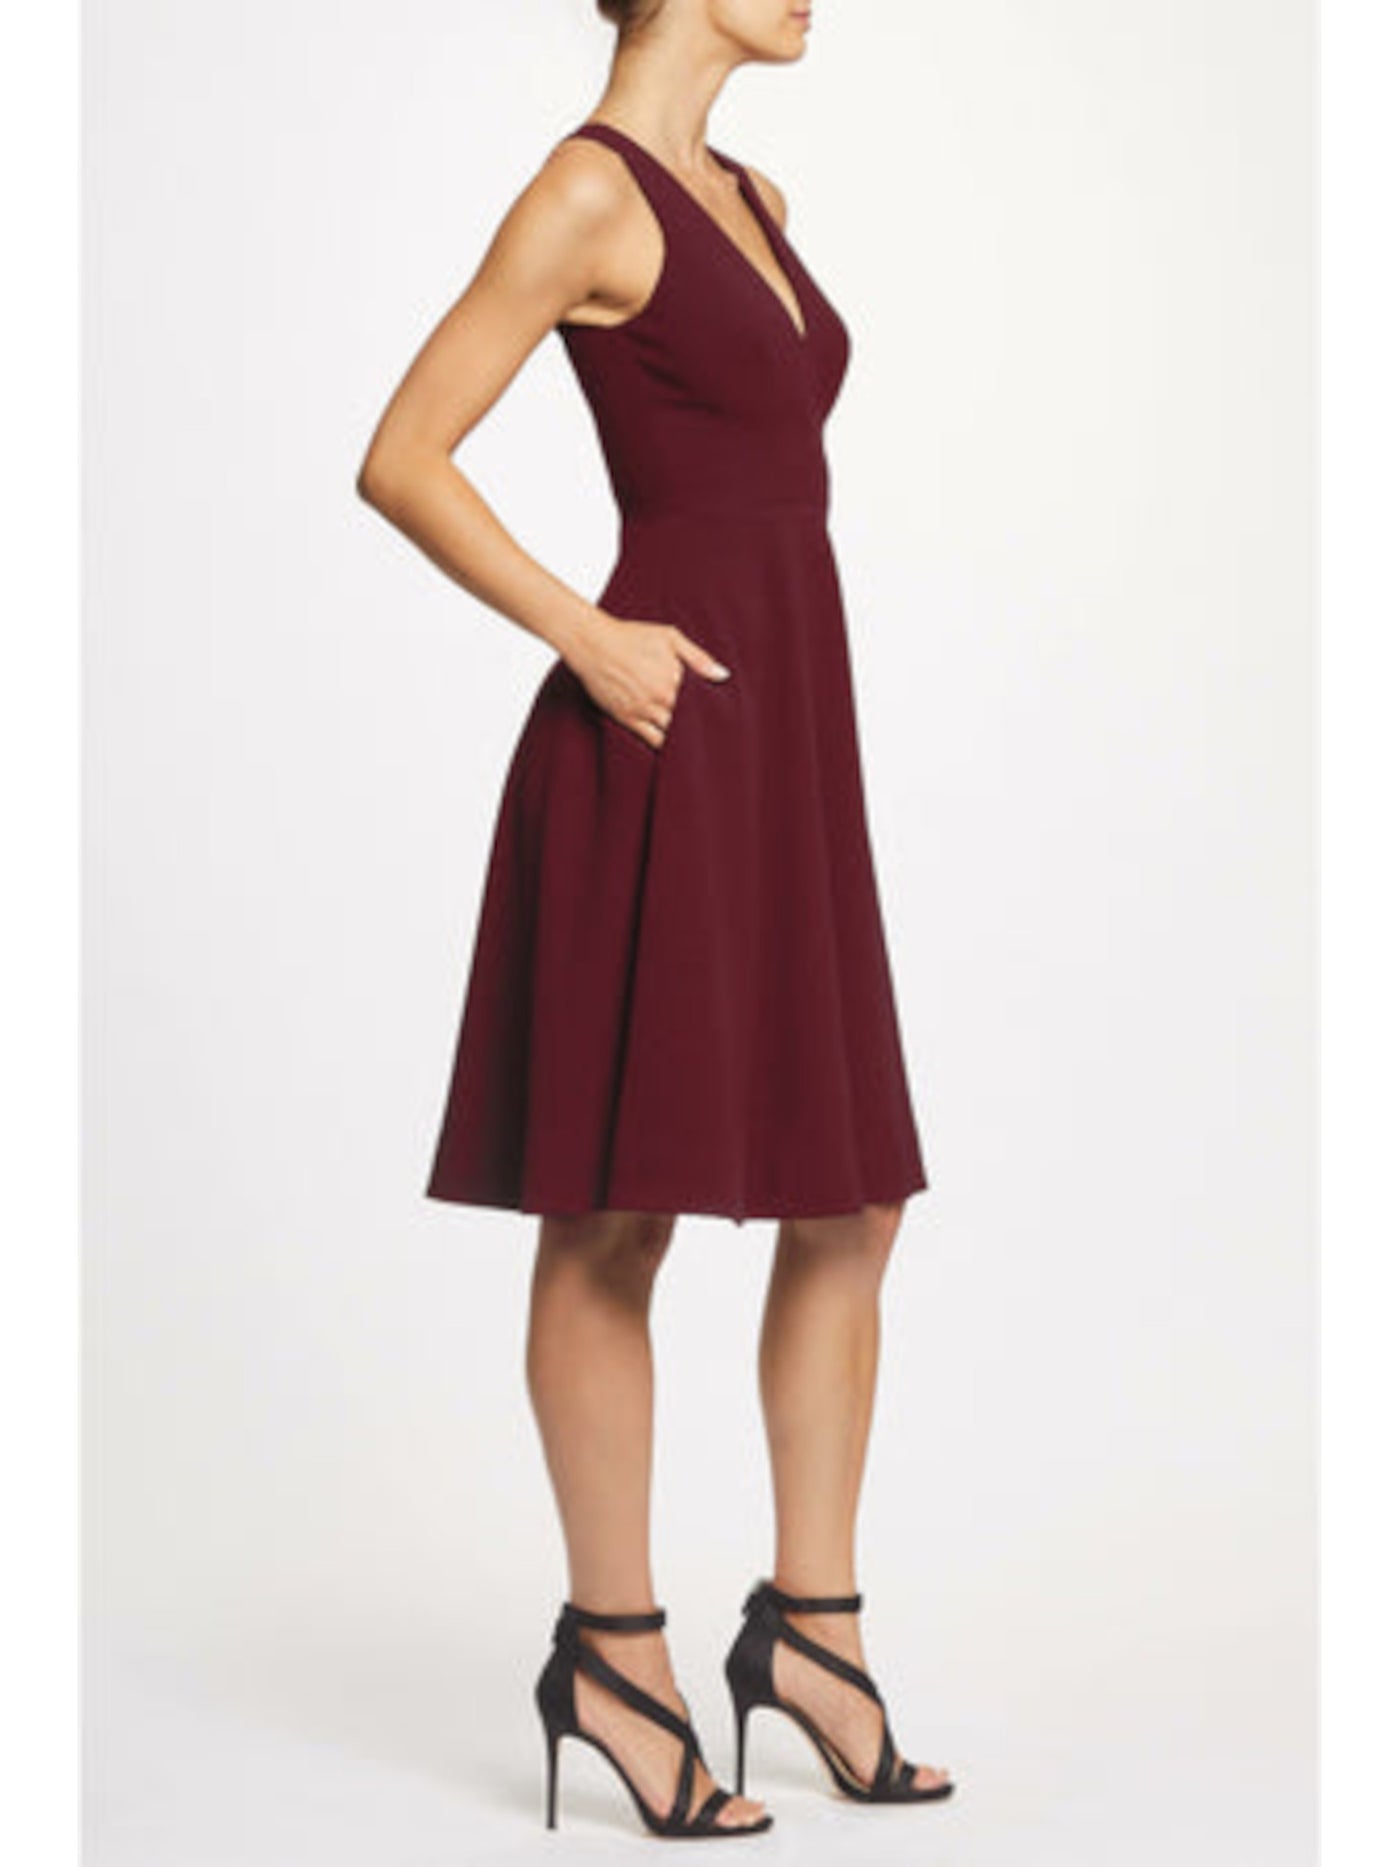 DRESS THE POPULATION Womens Burgundy Zippered Pocketed Textured Lined Sleeveless V Neck Below The Knee Party Fit + Flare Dress XL